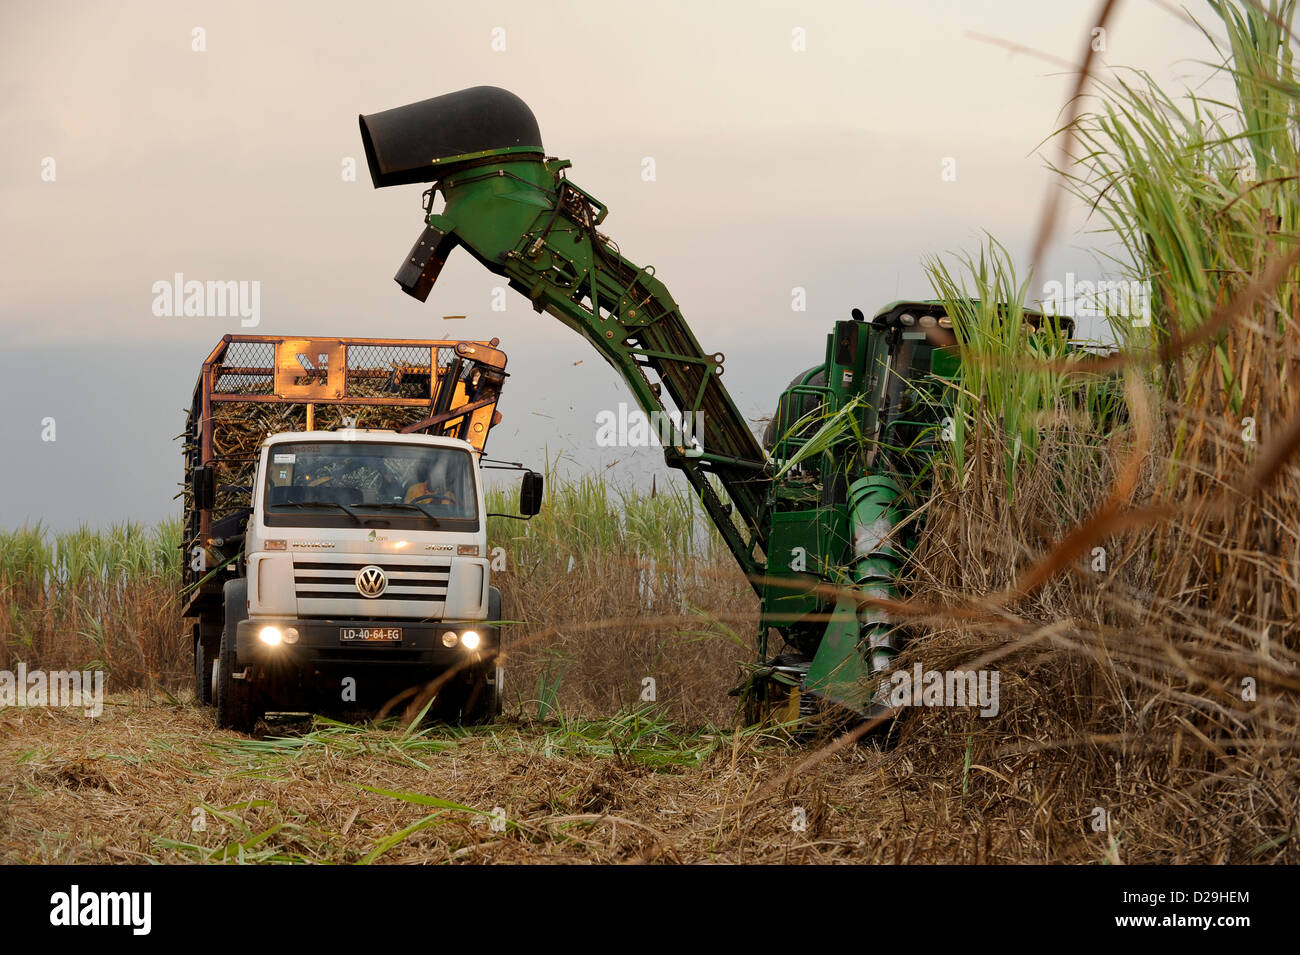 ANGOLA Malange , PAC Pòlo Agroindustrial de Capanda, Biocom Project, joint venture of Brazil company Odebrecht and Angolian state oil company Sonangol, sugarcane harvest with John Deere combine harvester , the sugarcane is processed in a own sugar factory to produce sugar or bioethanol for fuel Stock Photo